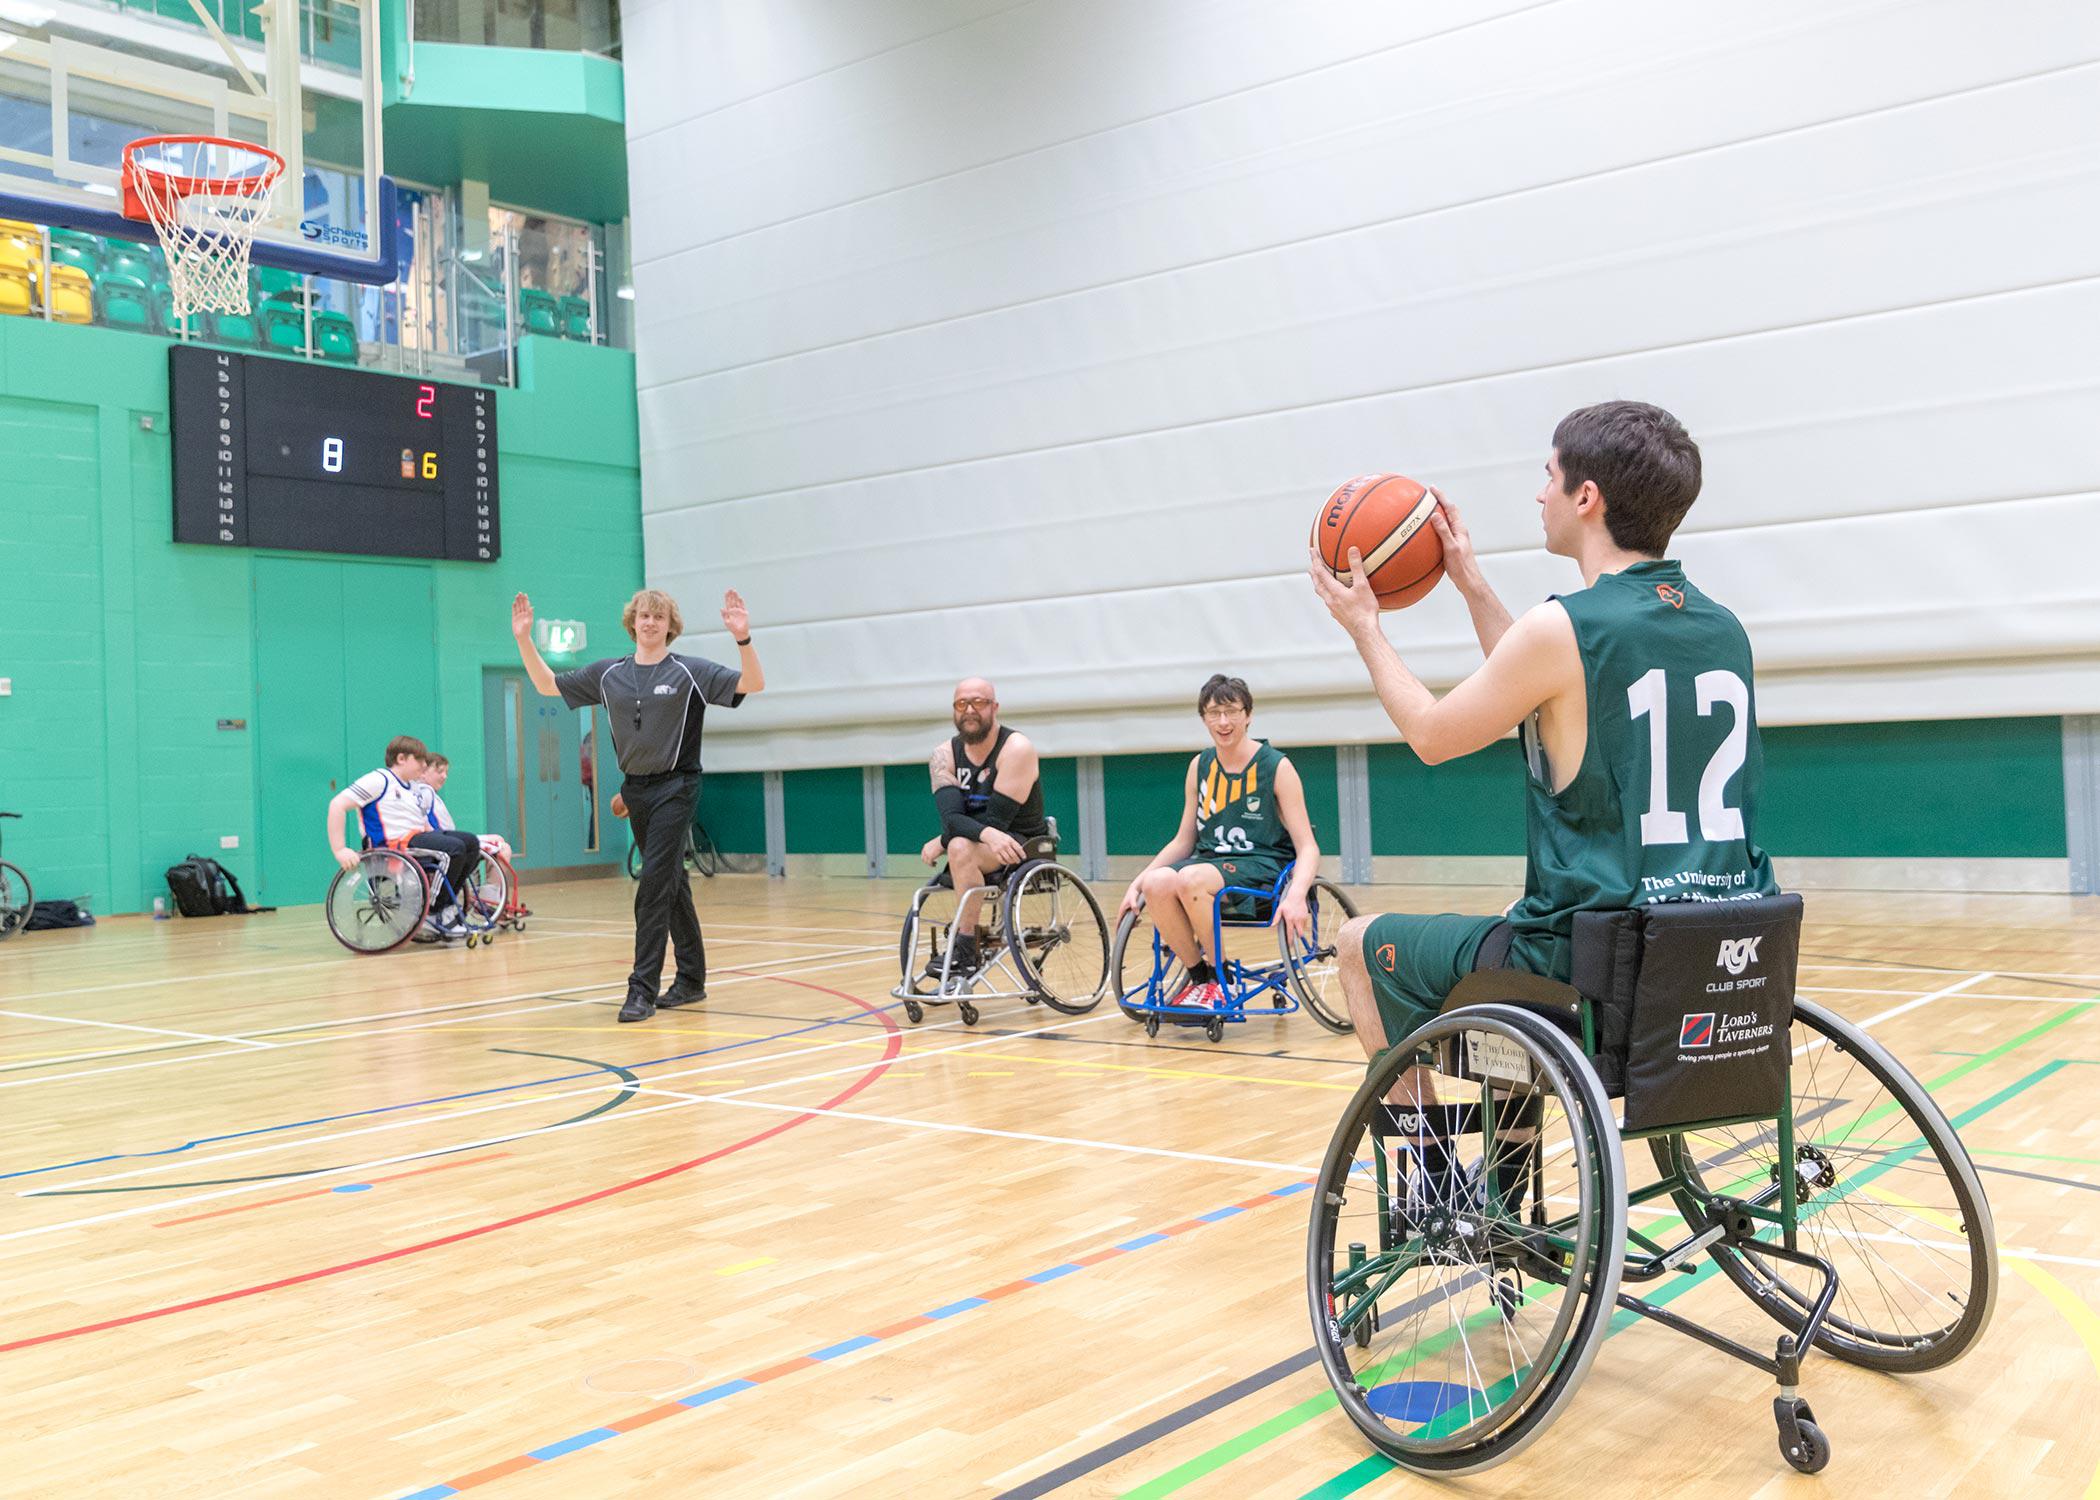 A wheelchair basketball player about to take a shot at the University of Nottingham